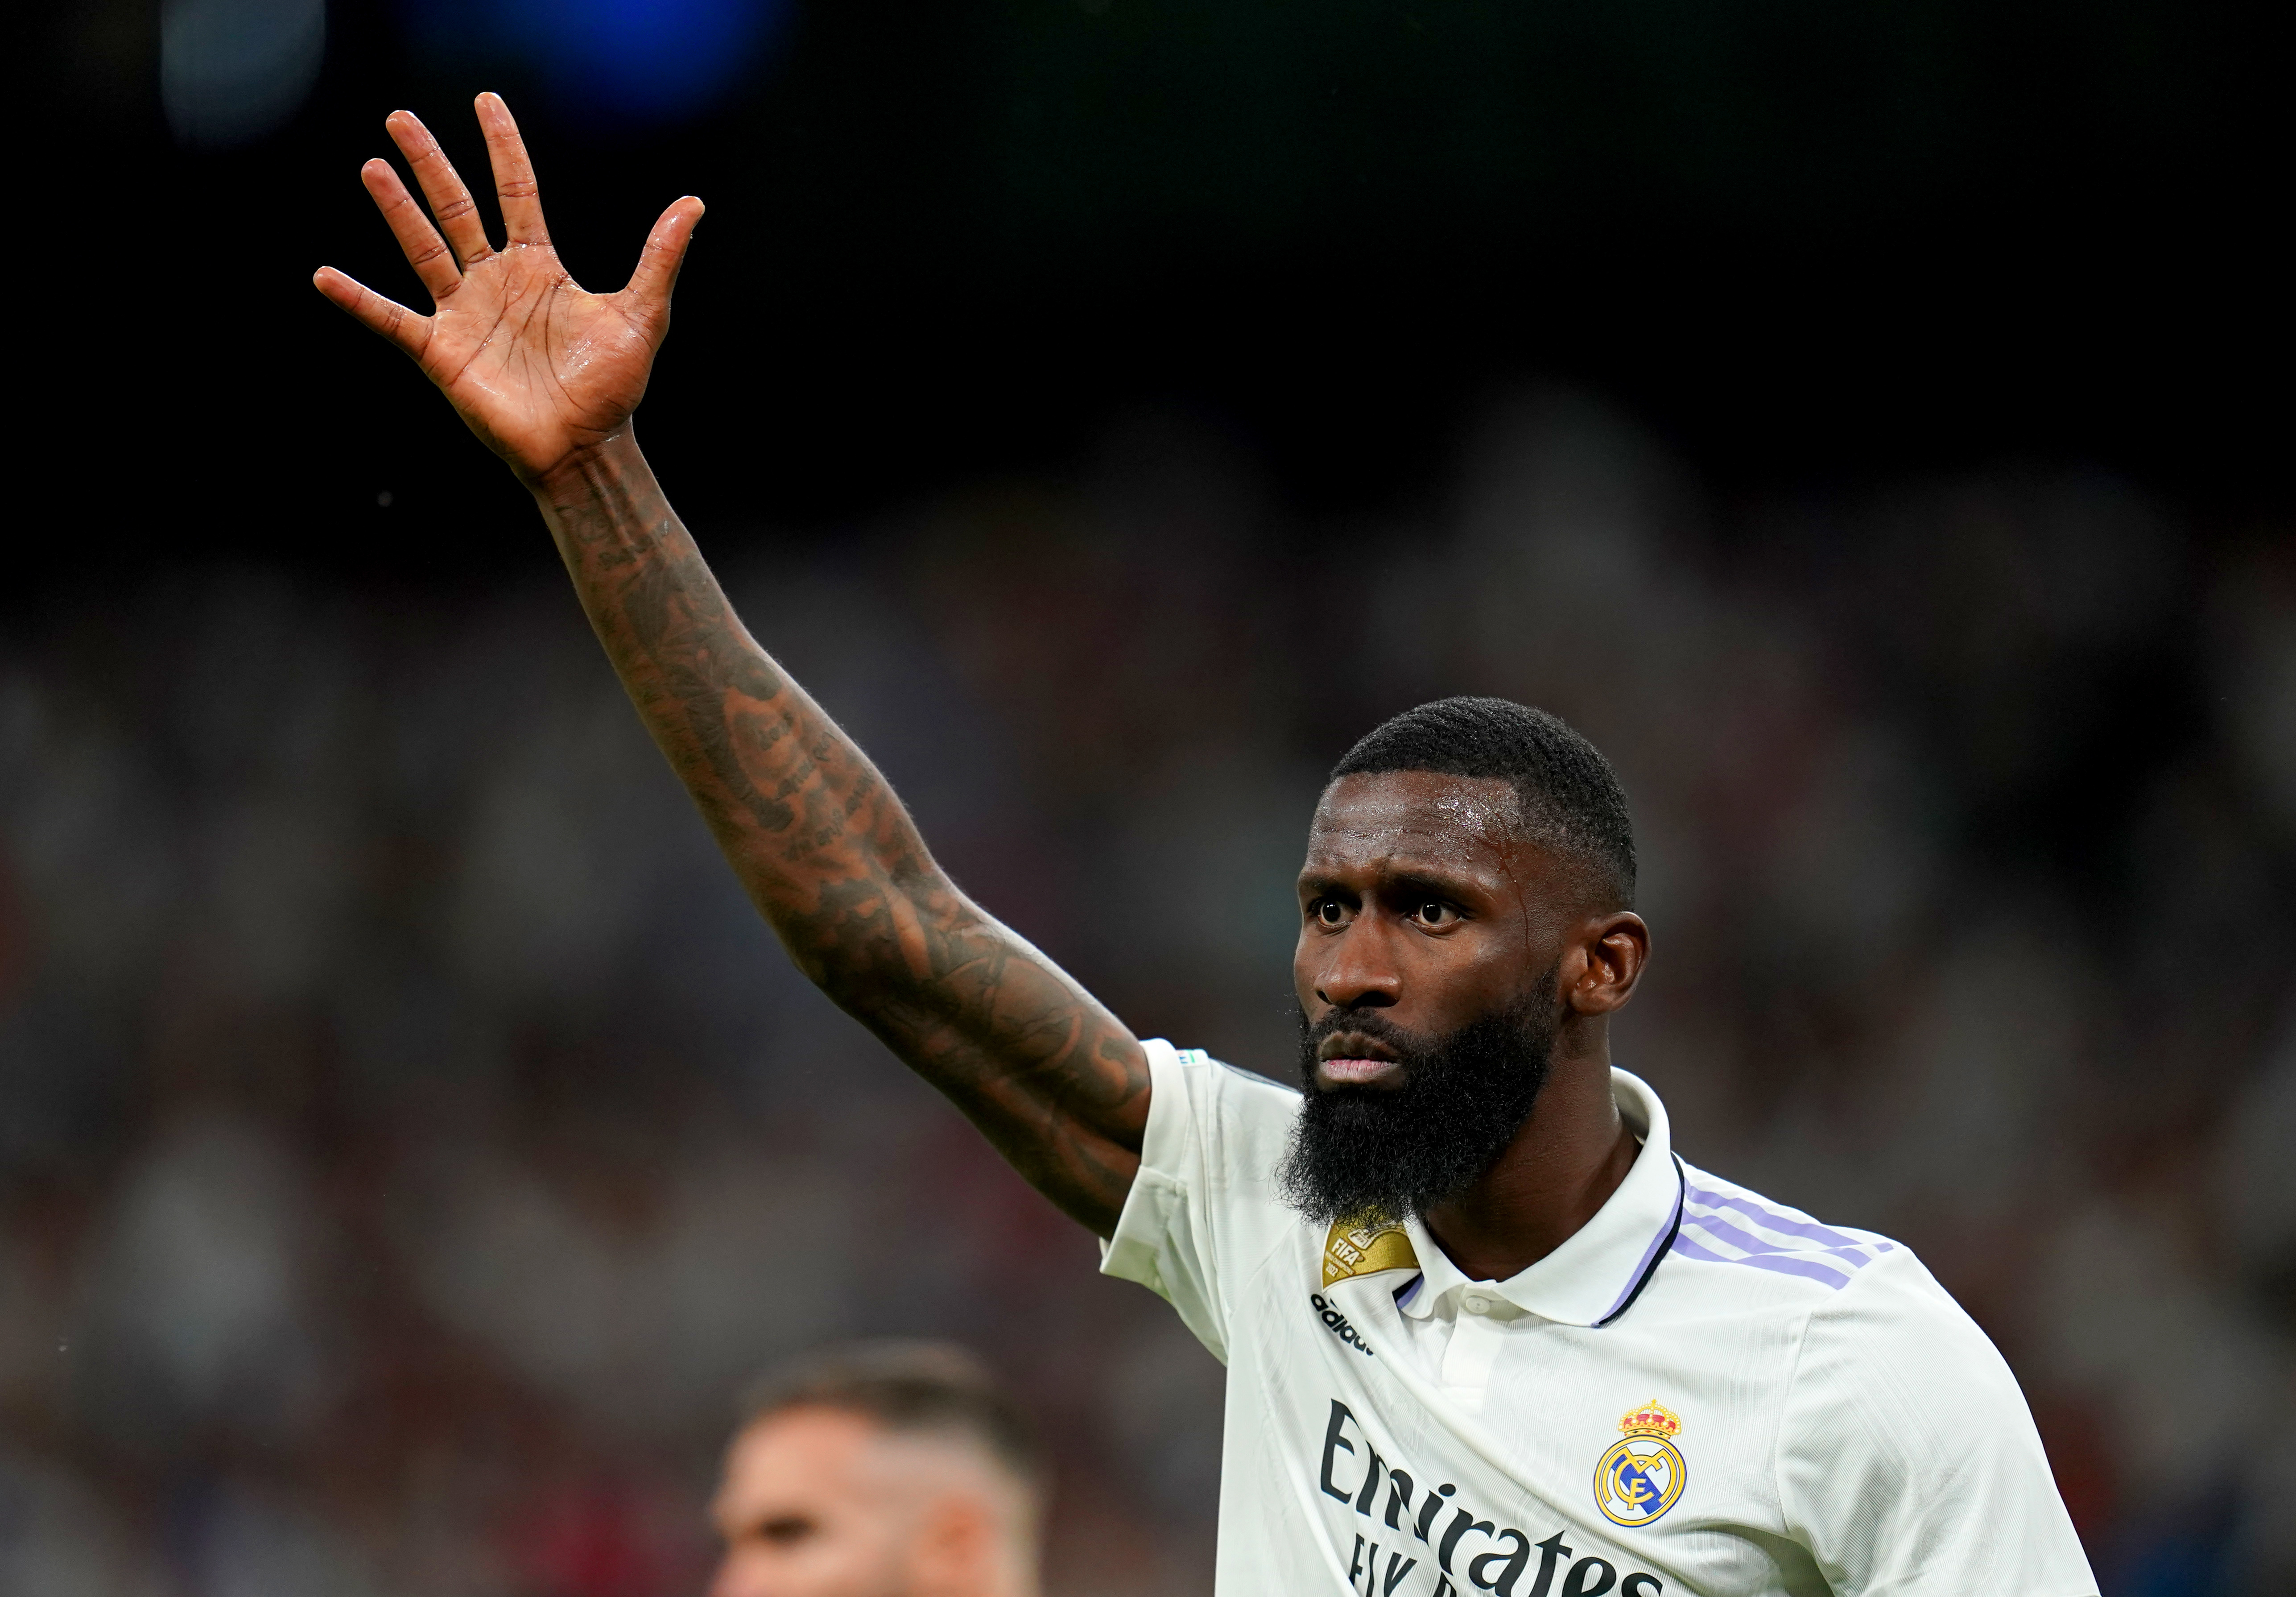 Antonio Rudiger will be included in Ancelotti's squad but may not play